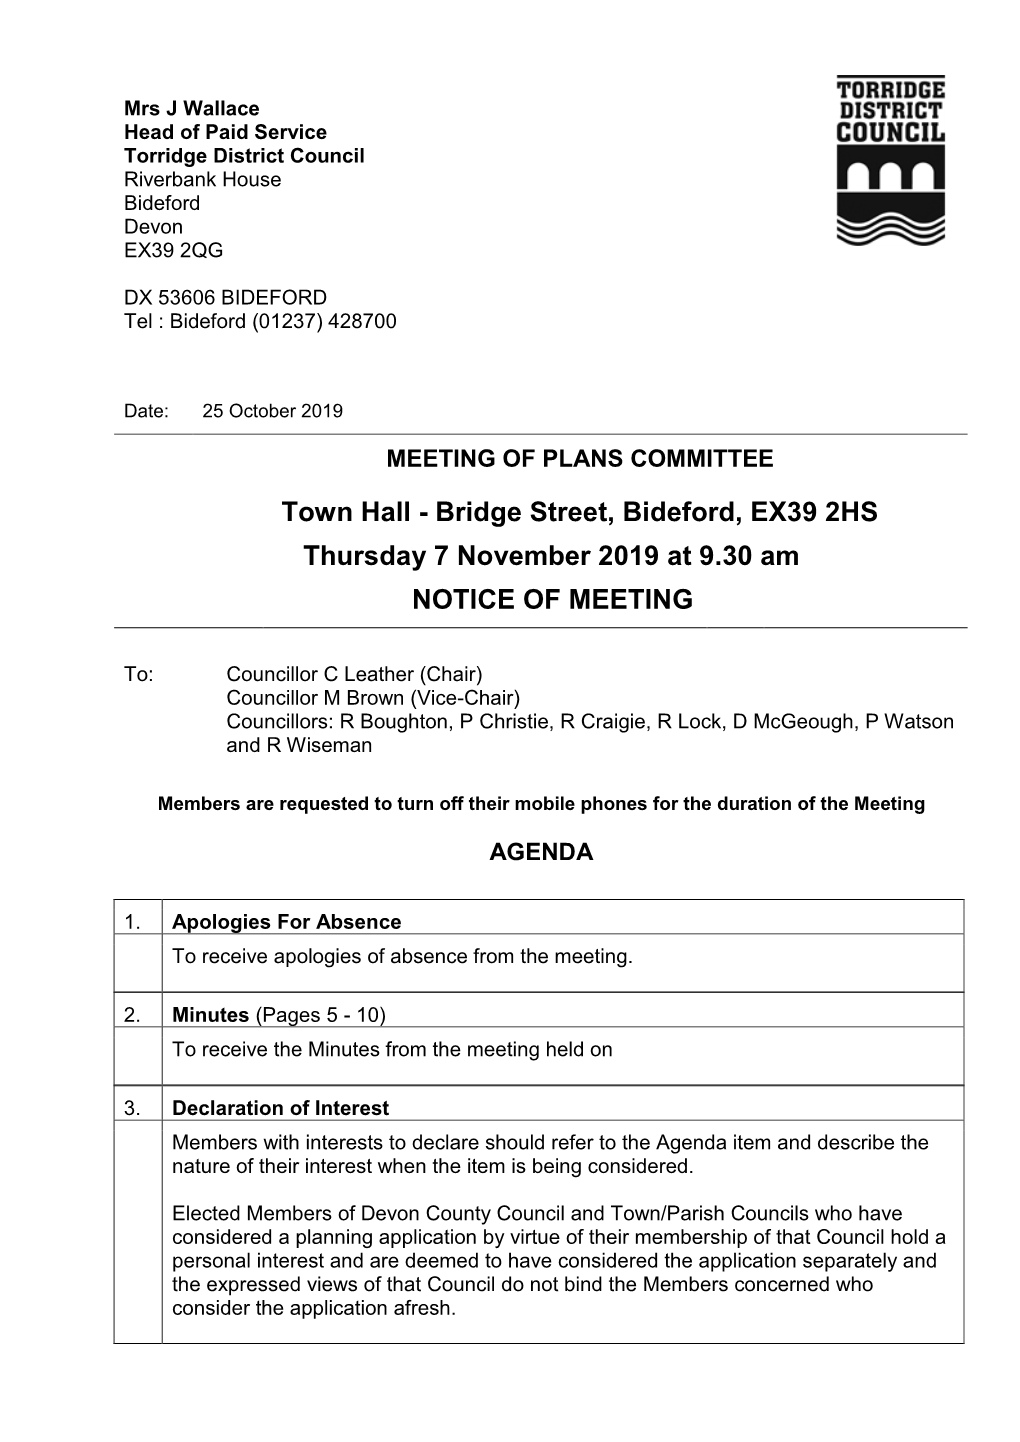 (Public Pack)Agenda Document for Plans Committee, 07/11/2019 09:30